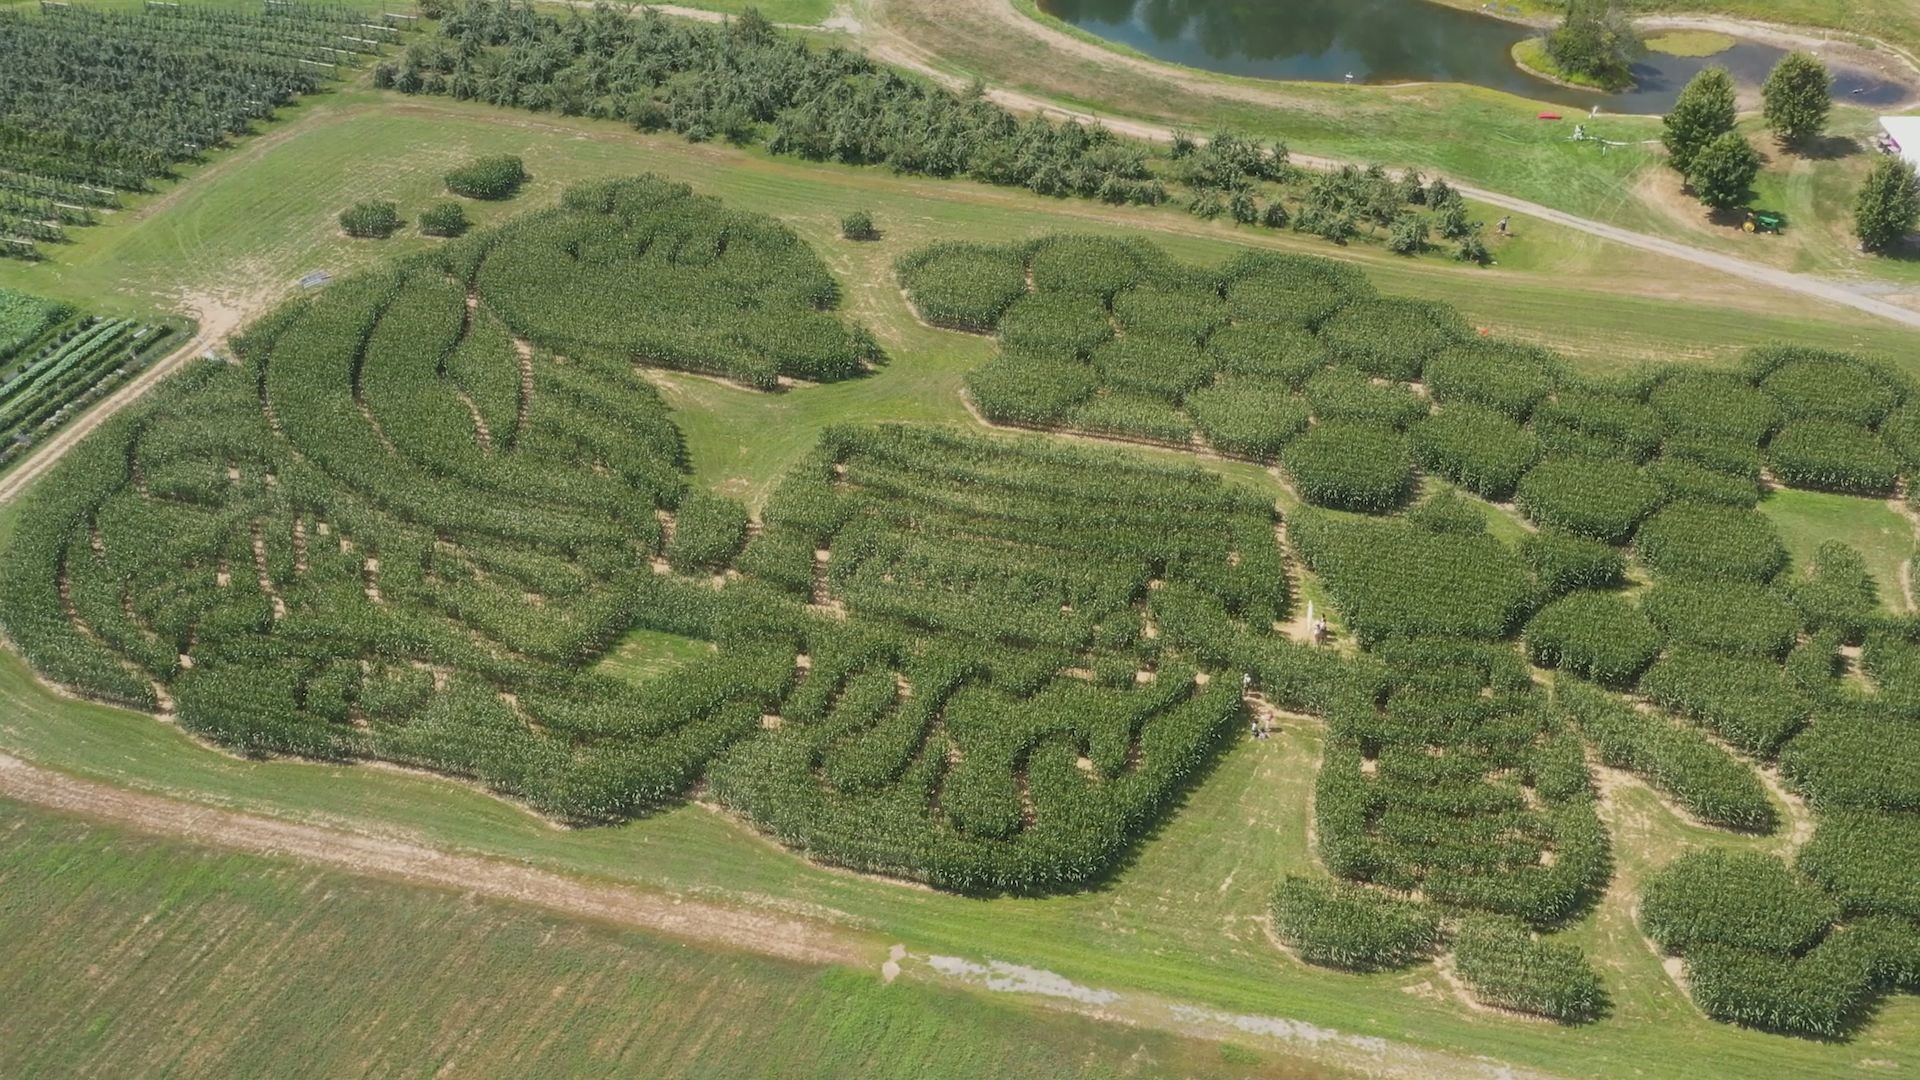 The "Winnie the Pooh" themed maze was designed in honor of the book's 95th anniversary. The maze has 60,000 corn plants in total.